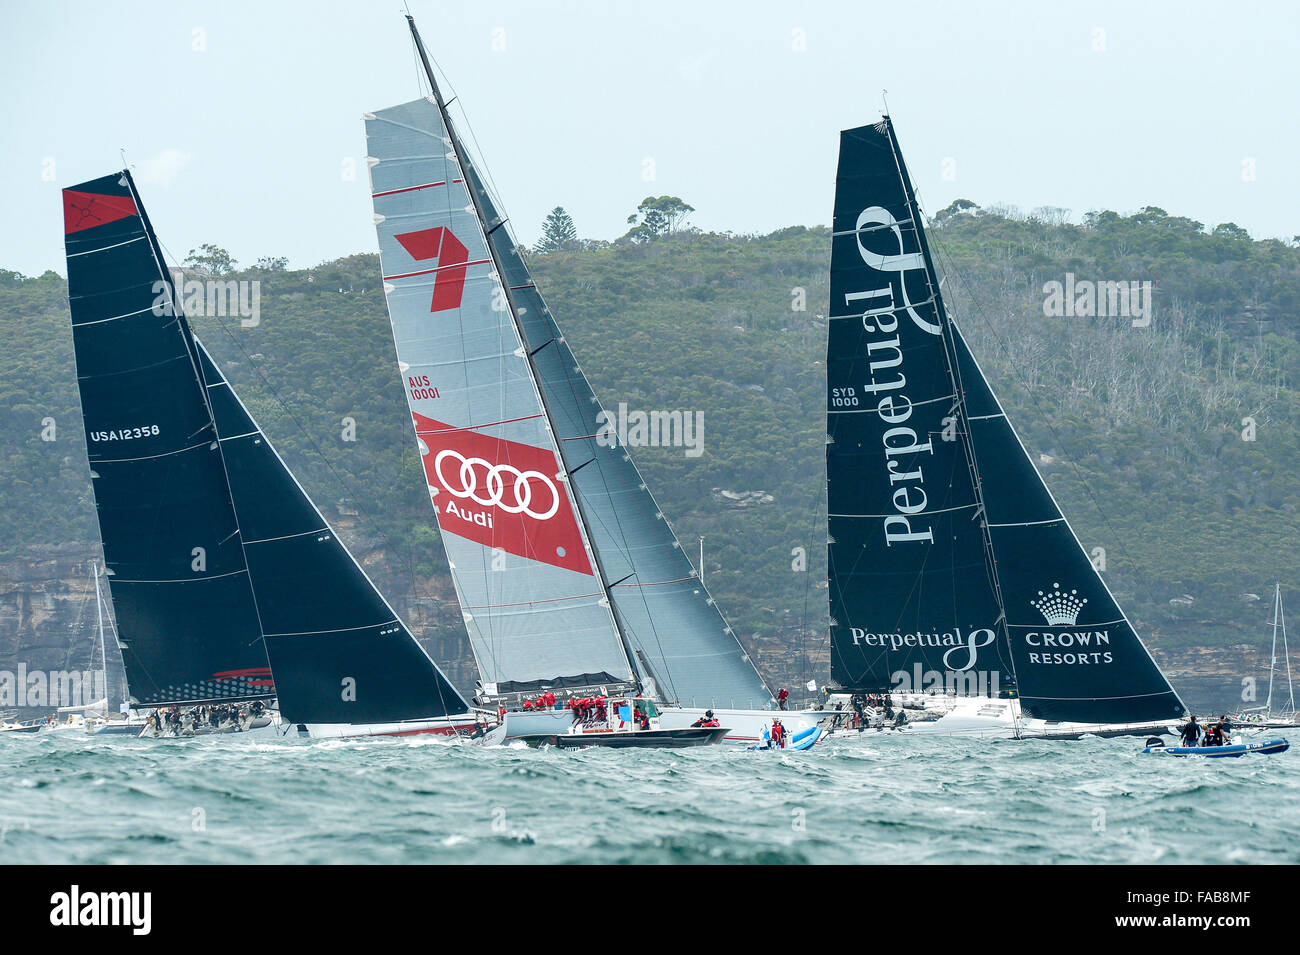 Sydney, Australia. 26th Dec, 2015. Rolex Sydney to Hobart Yacht race 2015. Wild Oats XI owned by Robert Oatley from NSW skippered by Mark Richards type RP100, Perpetual Loyal owner/skipper by Anthony Bell from NSW type Juan-K 100. and Comanche owned by Jim Clark &amp; Kristy Hinze Clark from SA skippered by Ken Read type 100 Supermaxi lead the race through the Heads during the start of the 629 nautical mile race from Sydney to Hobart on Sydney Harbour. Credit:  Action Plus Sports/Alamy Live News Stock Photo